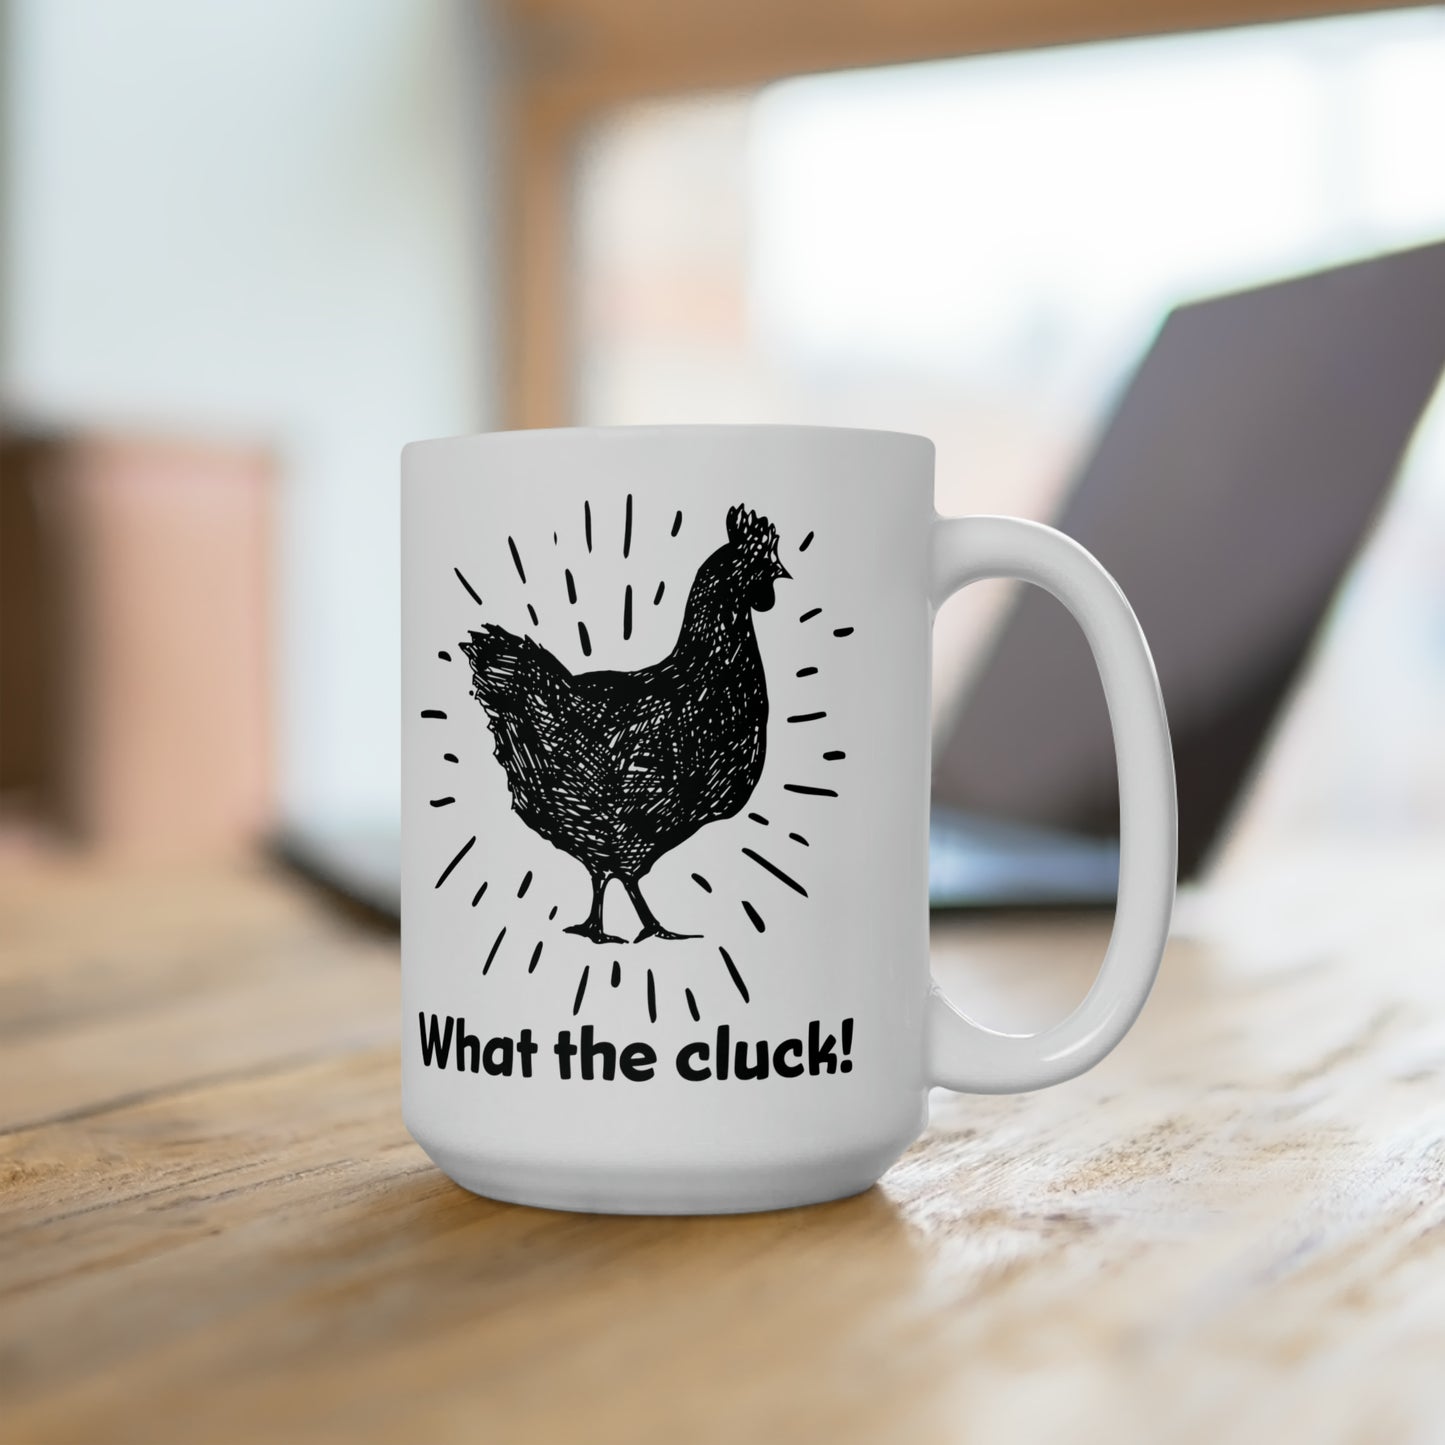 Funny Chicken Coffee Mug For What The Cluck Quote Hot Tea Cup